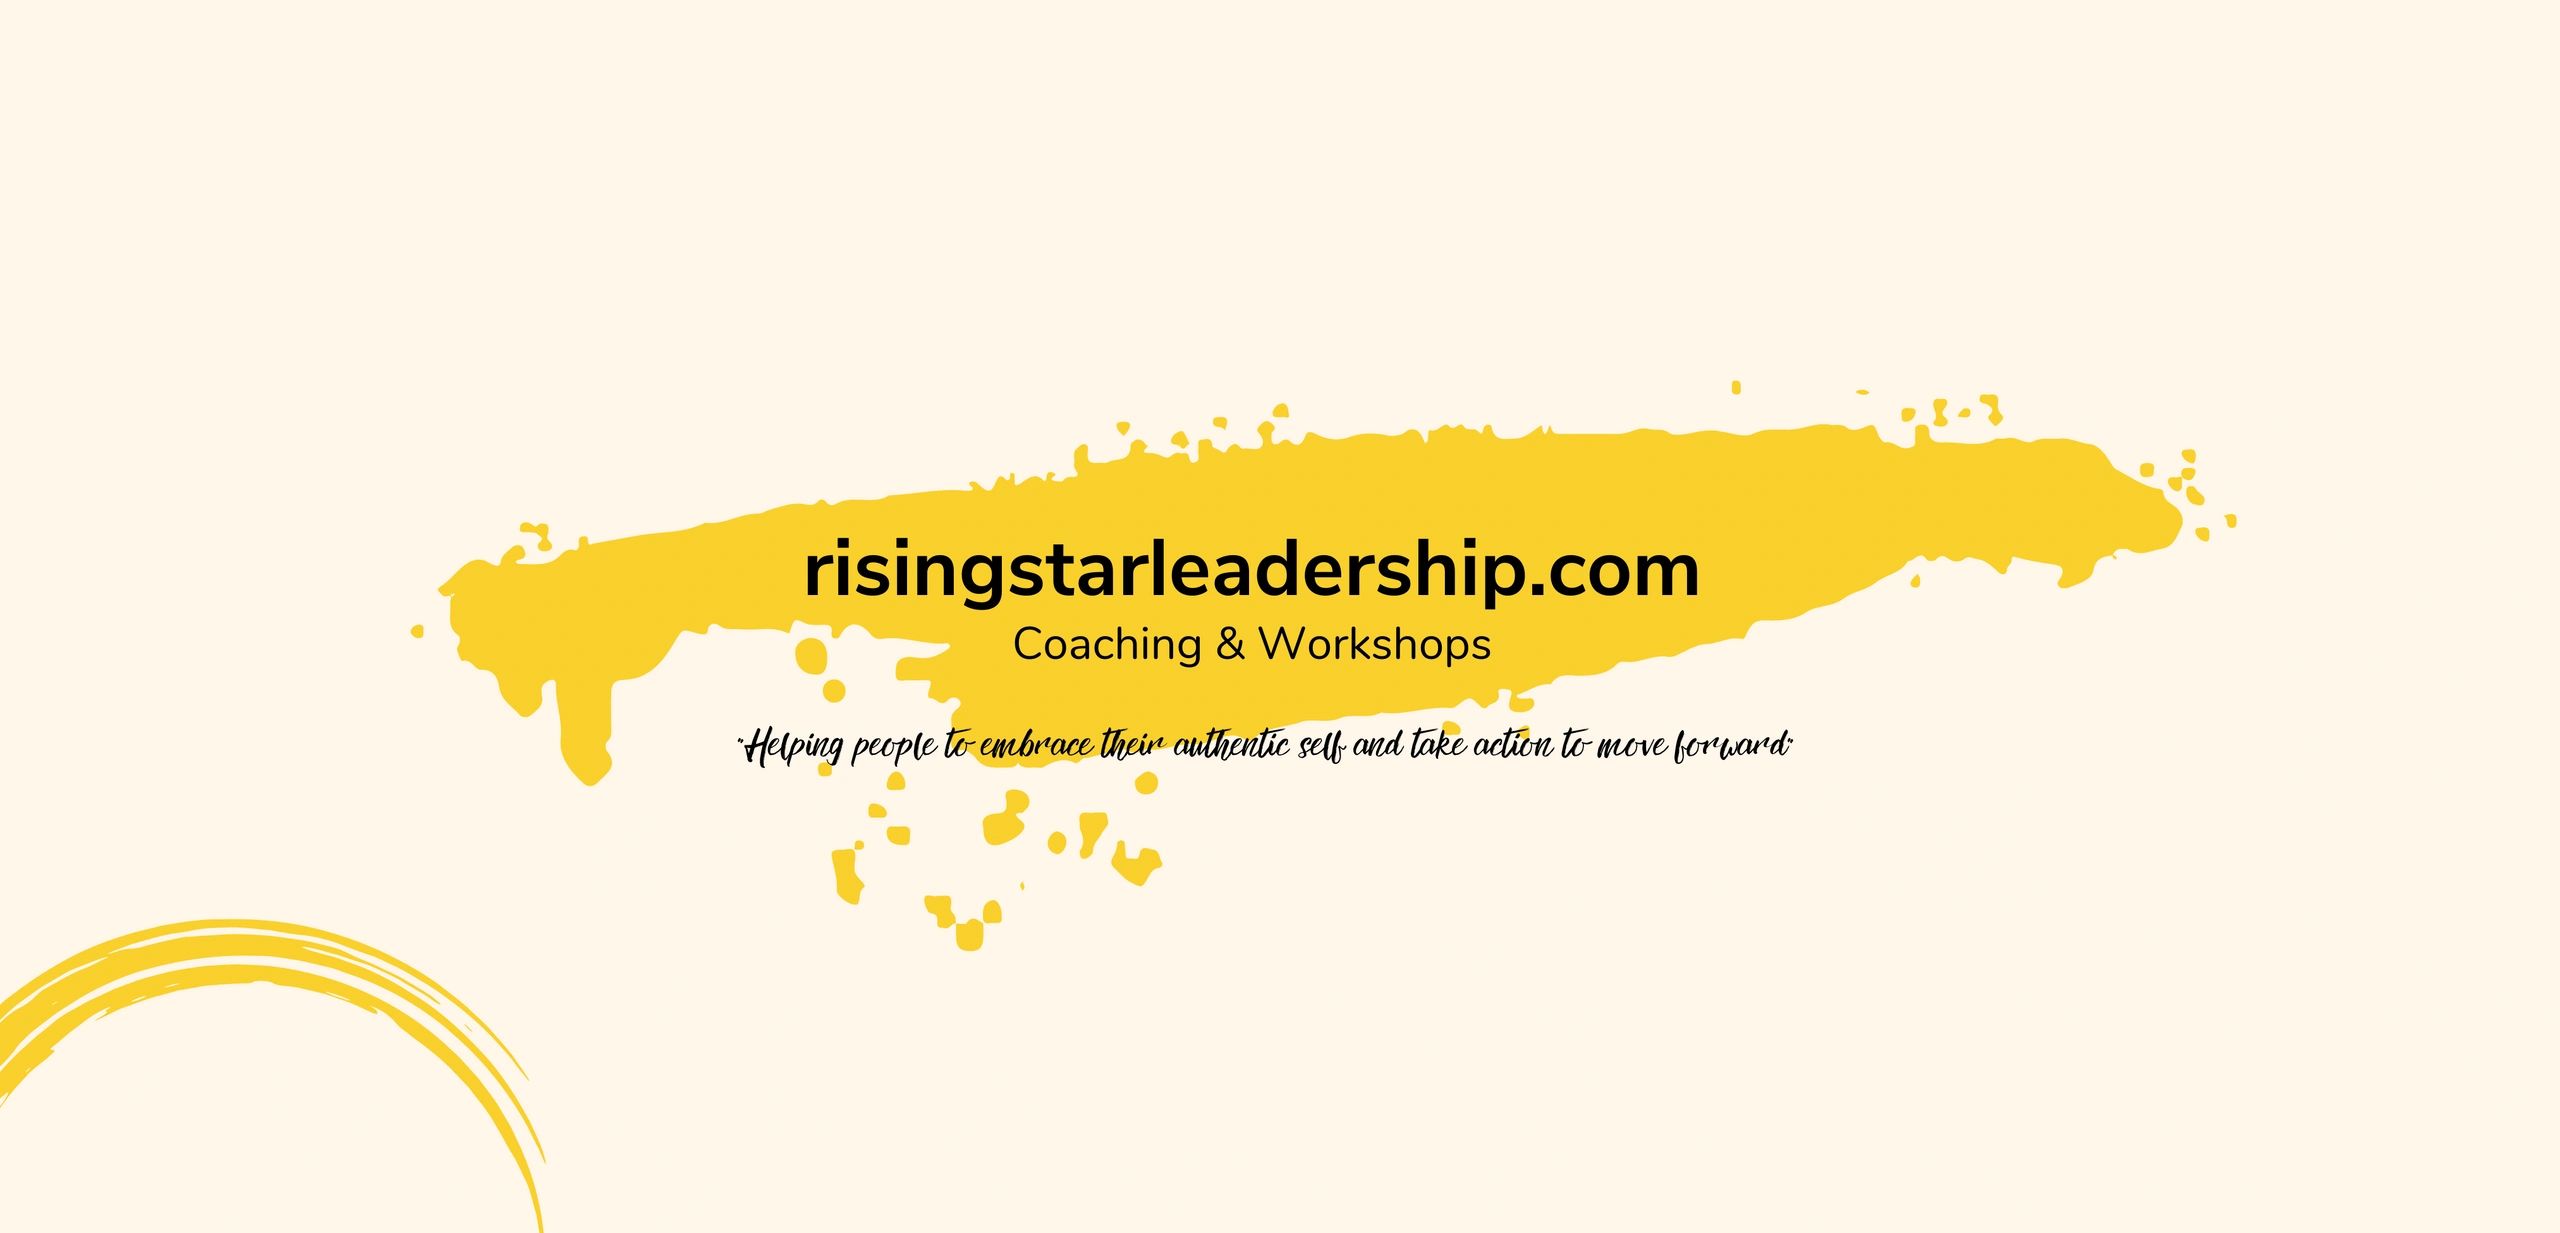 Rising Stars Youth Leadership Academy – Welcome to the City of